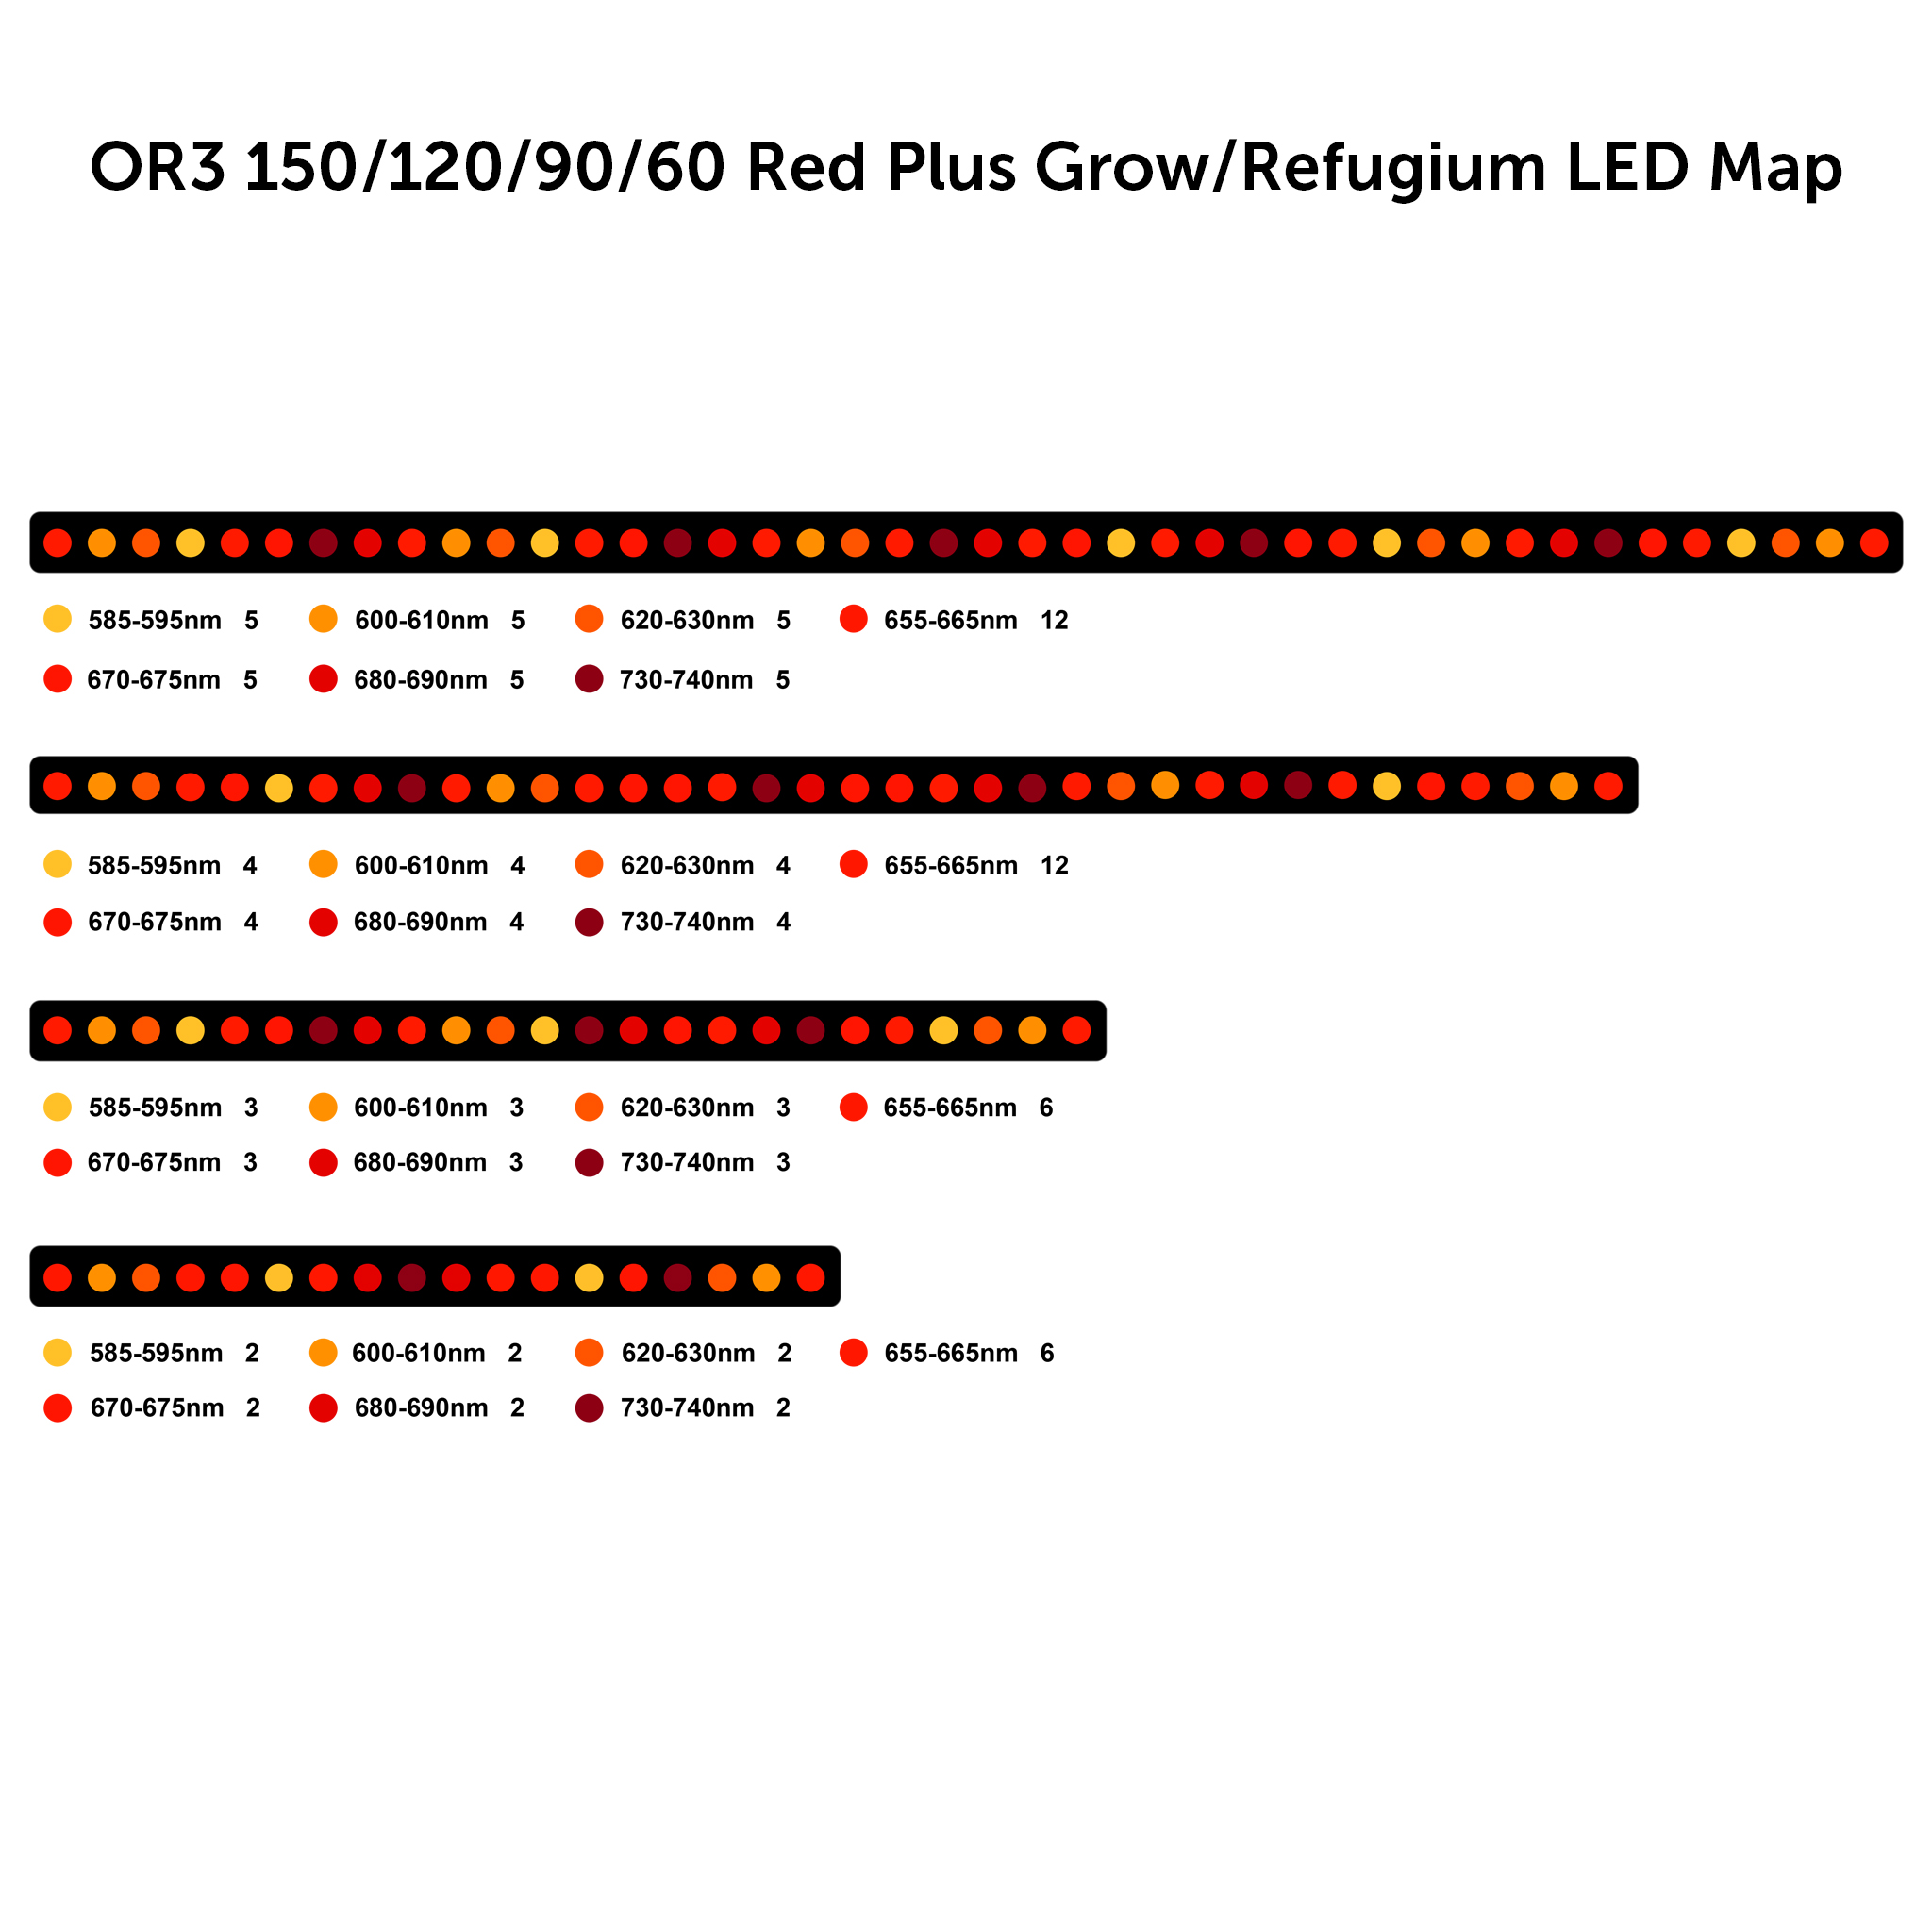 or3-red-plus-Grow-refugium-led-map. orXNUMX-red-plus-Grow-refugium-led-map. orXNUMX-red-plus-Grow-refugium-led-map